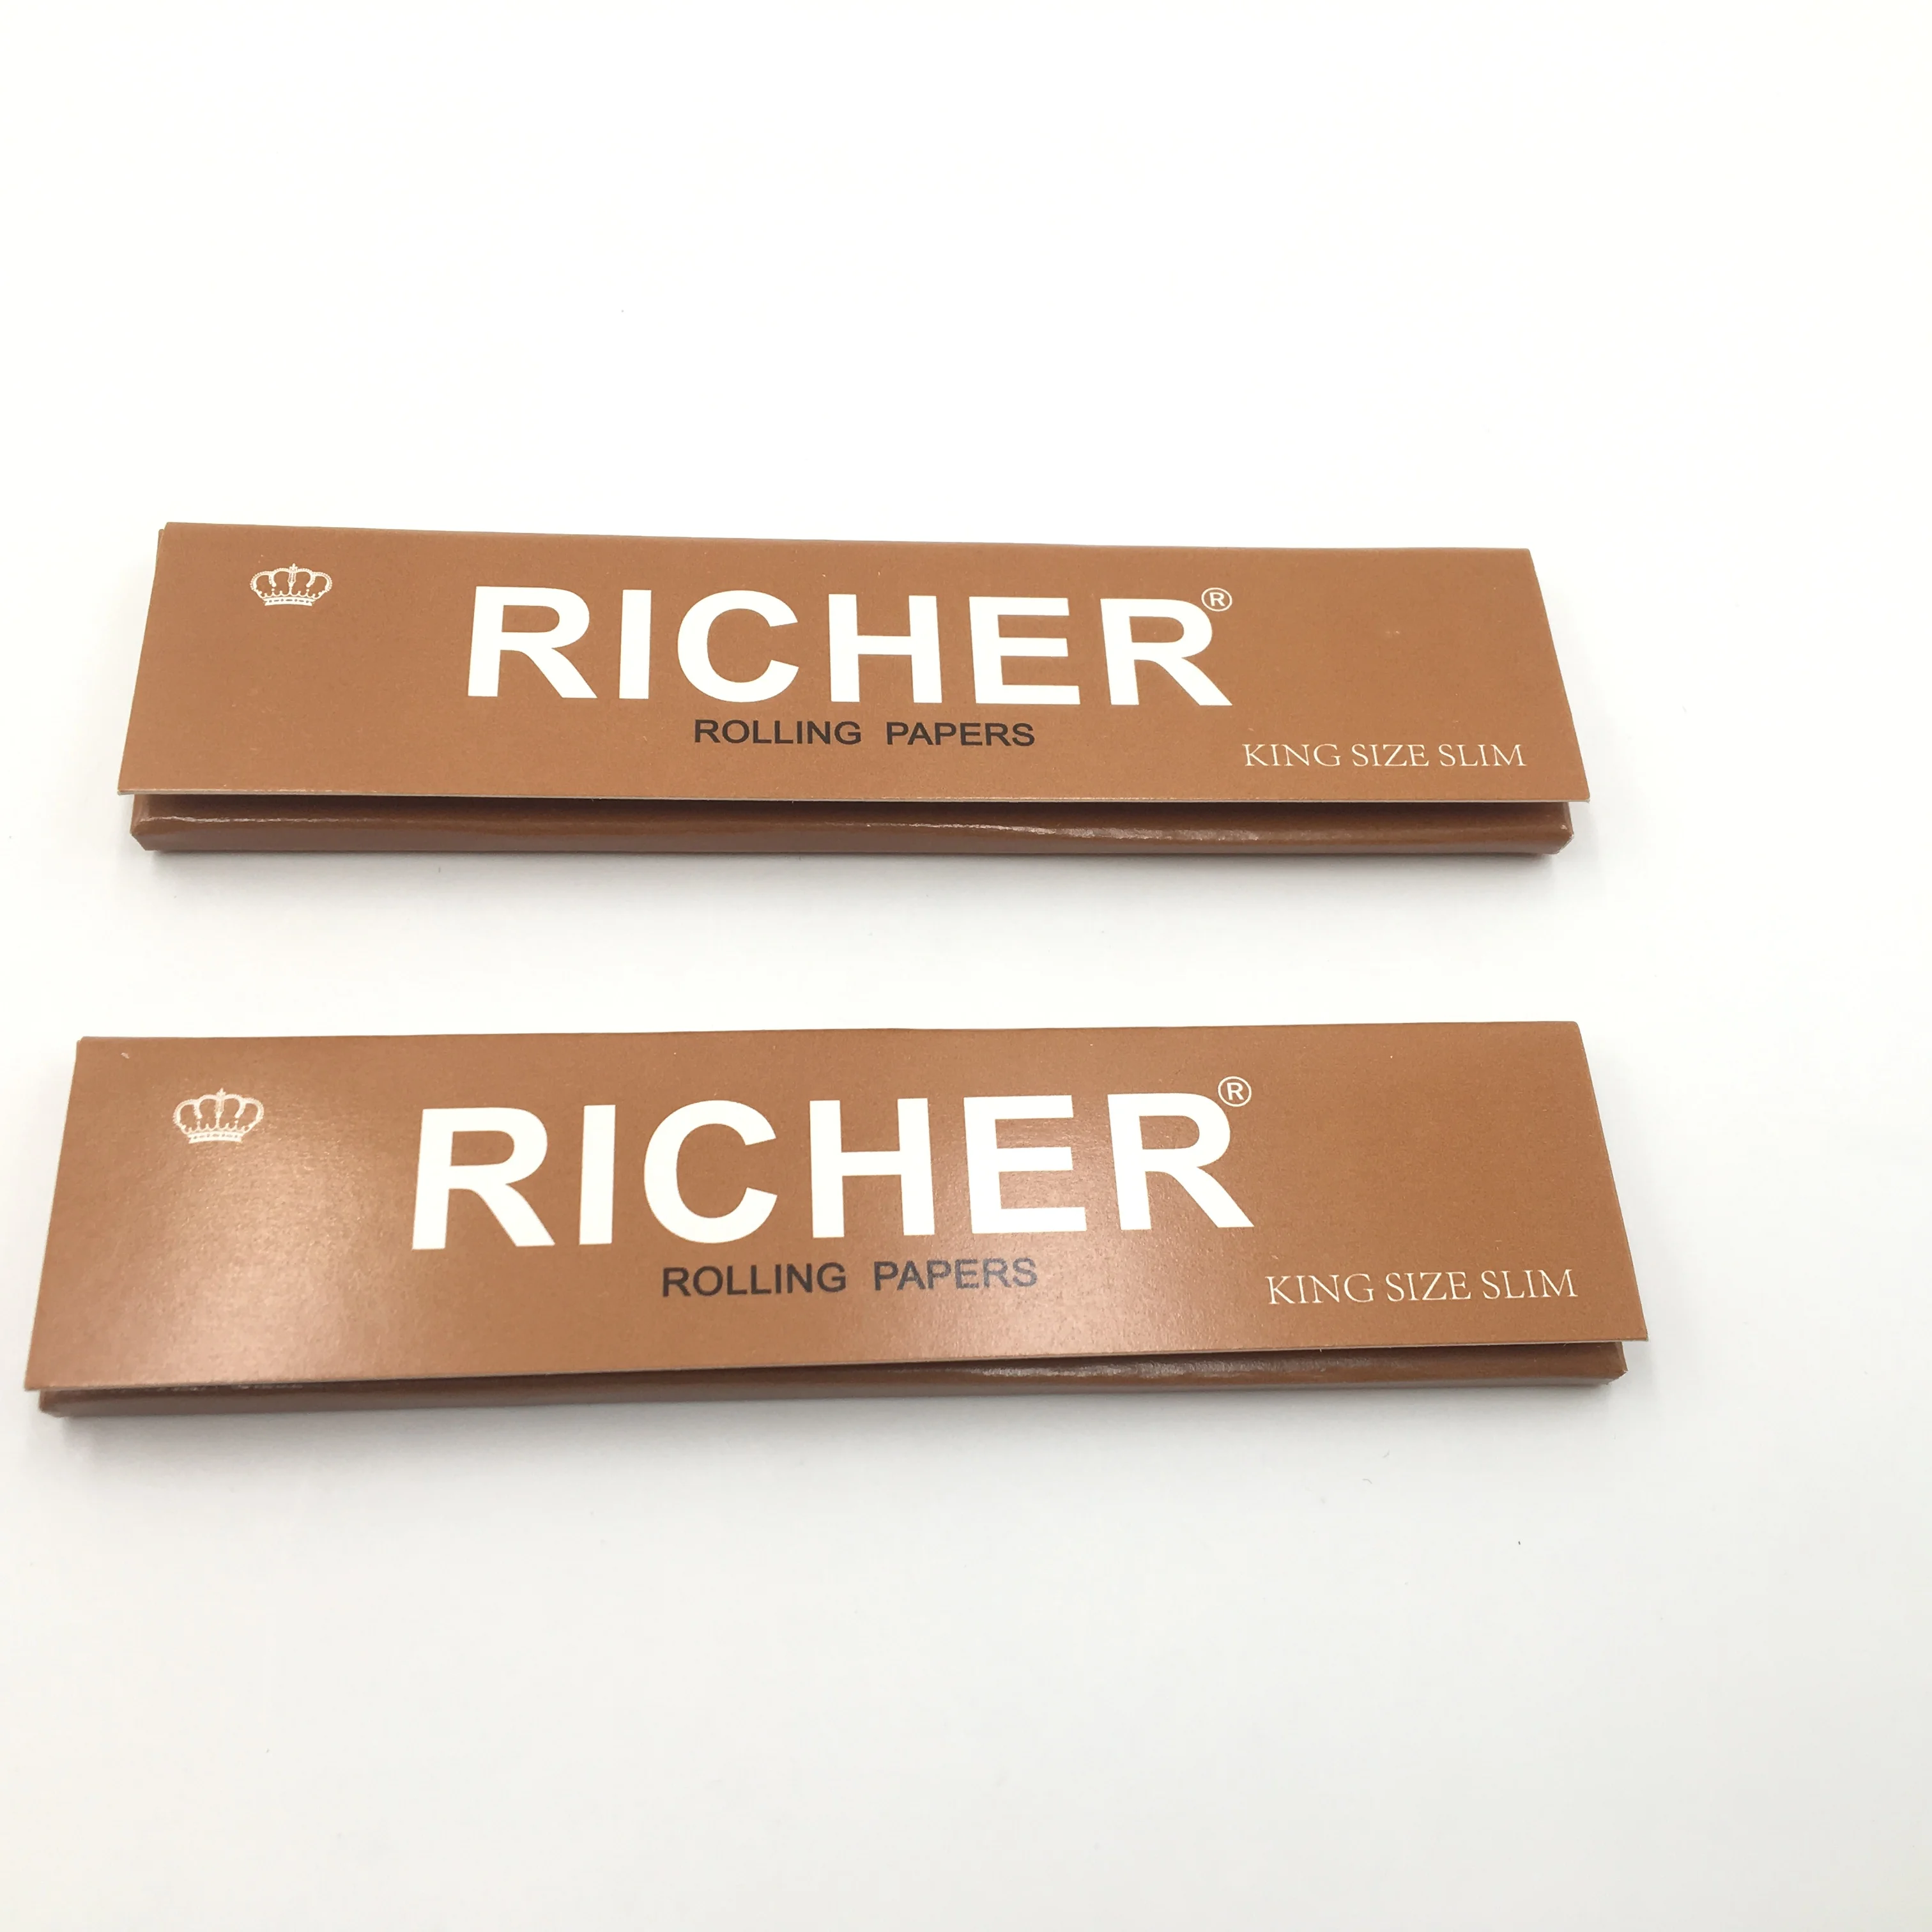 
RICHER brand Brown Package Unbleached blend hemp Rolling Papers 